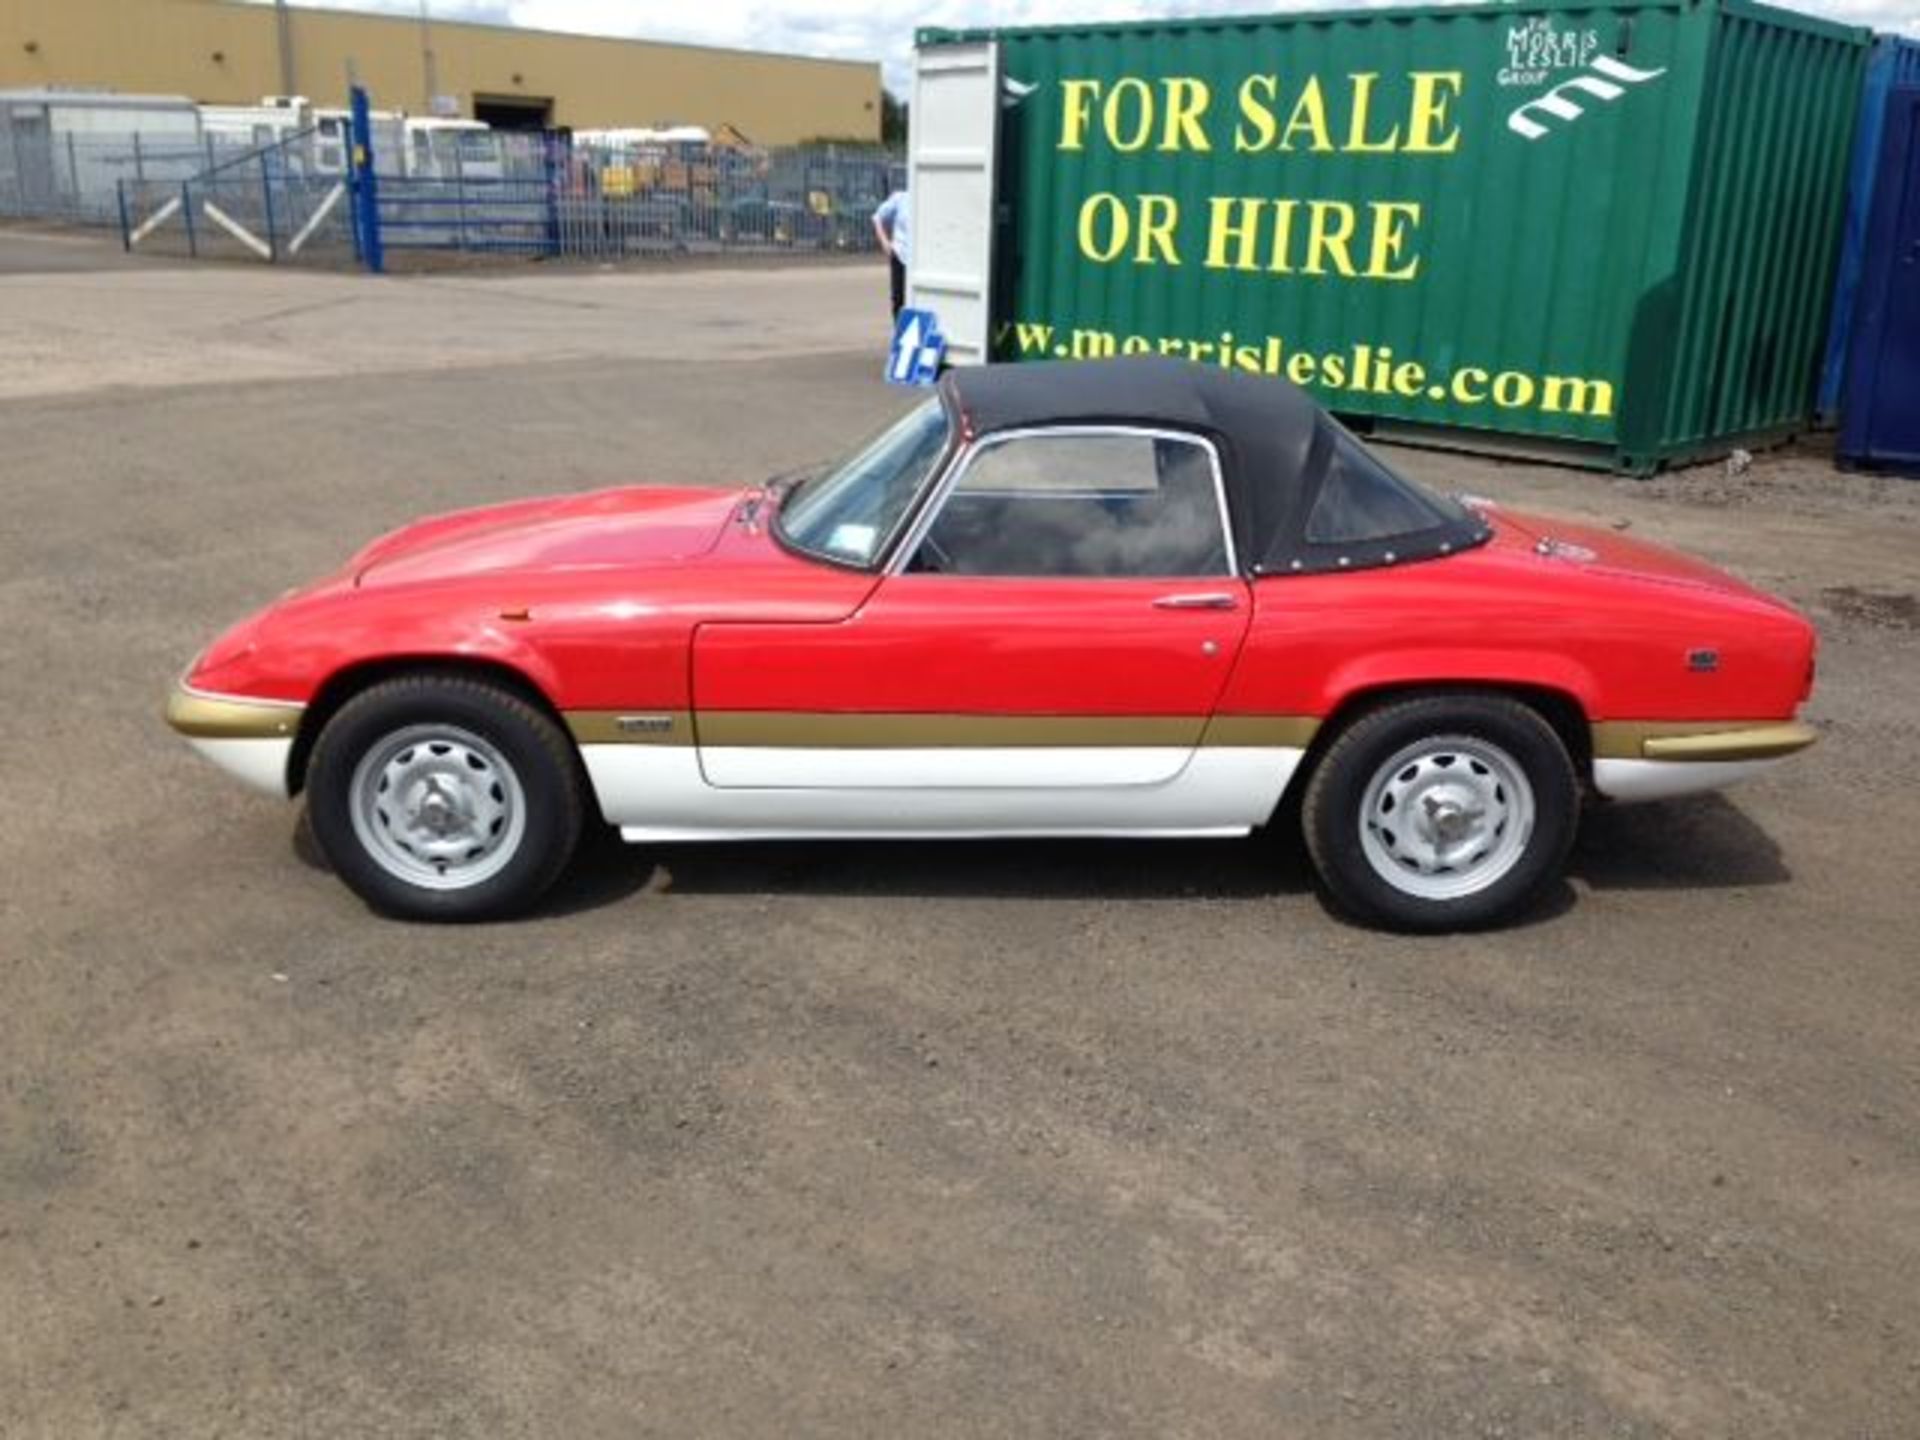 LOTUS, ELAN SERIES 4 - 1588cc, Chassis number 7002050018C - presented with an MOT test certificate - Image 4 of 7